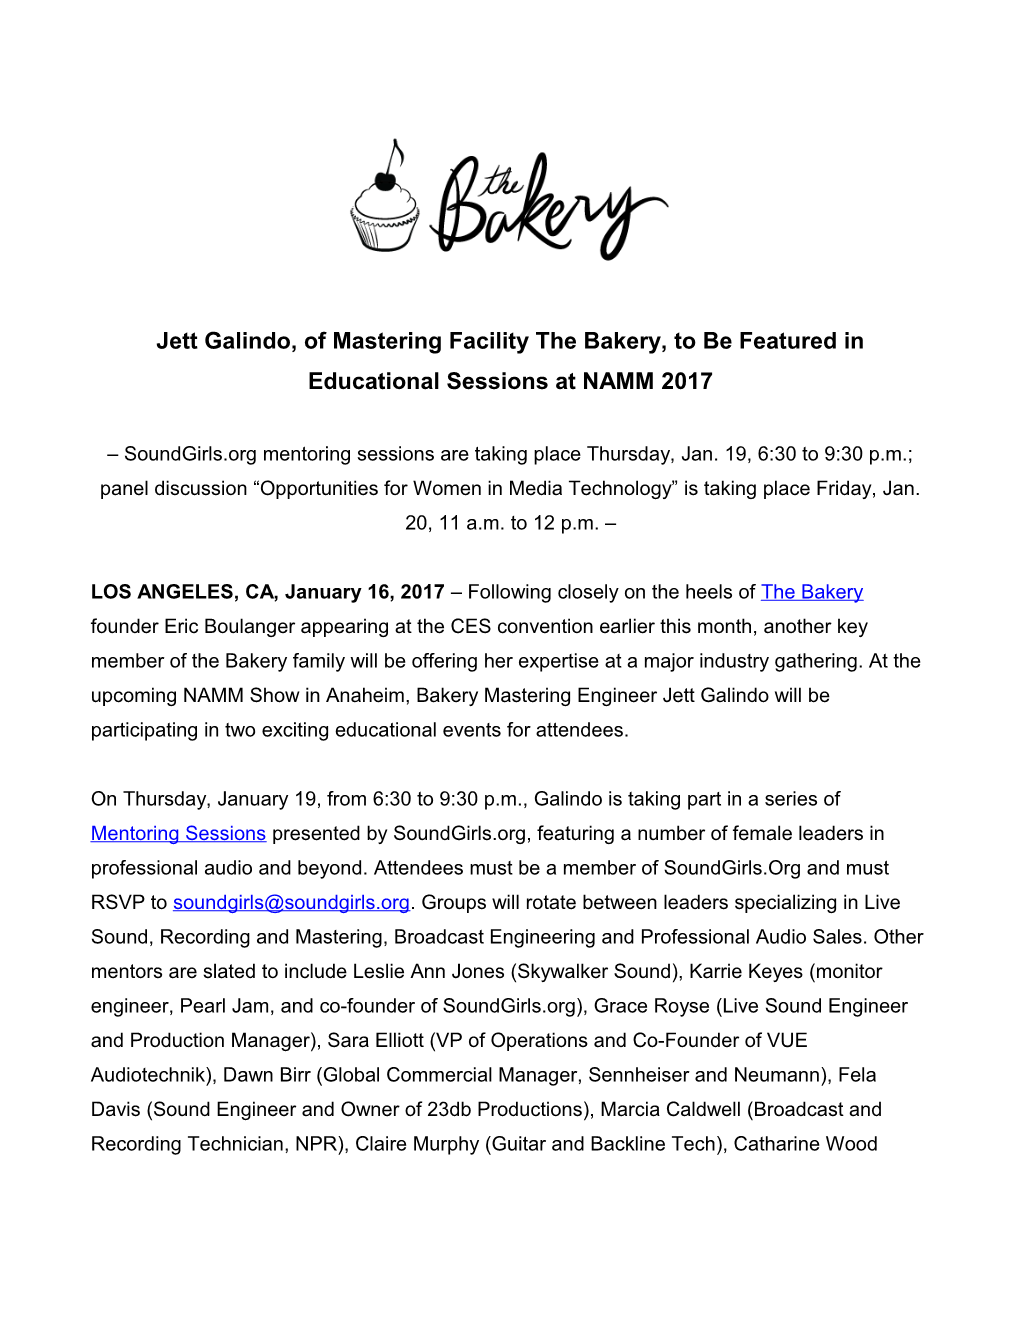 Jett Galindo, of Mastering Facility the Bakery, to Be Featured in Educational Sessions